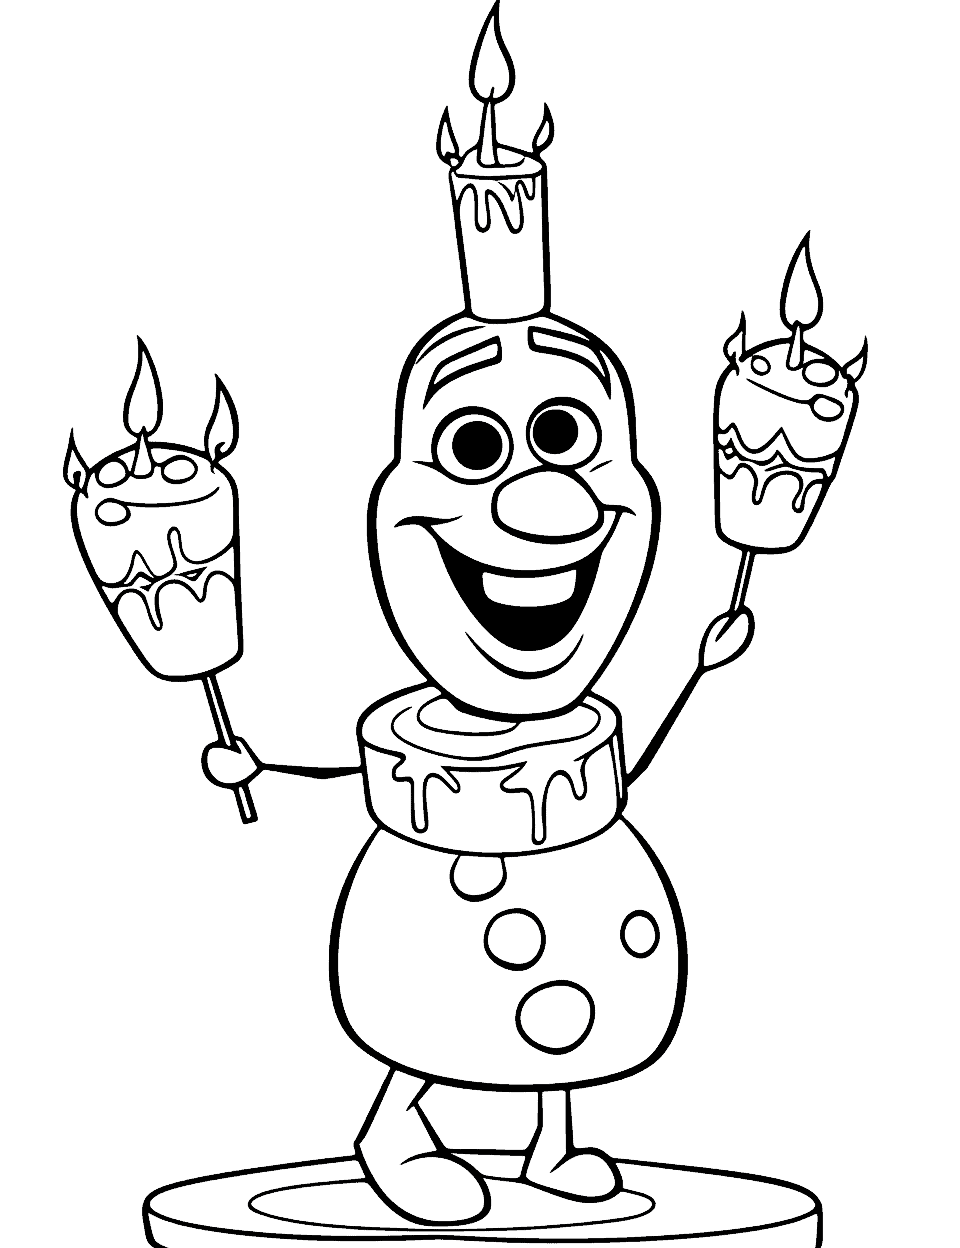 Olaf's Summer Birthday Happy Coloring Page - Olaf from Frozen, in the shape of a birthday cake.